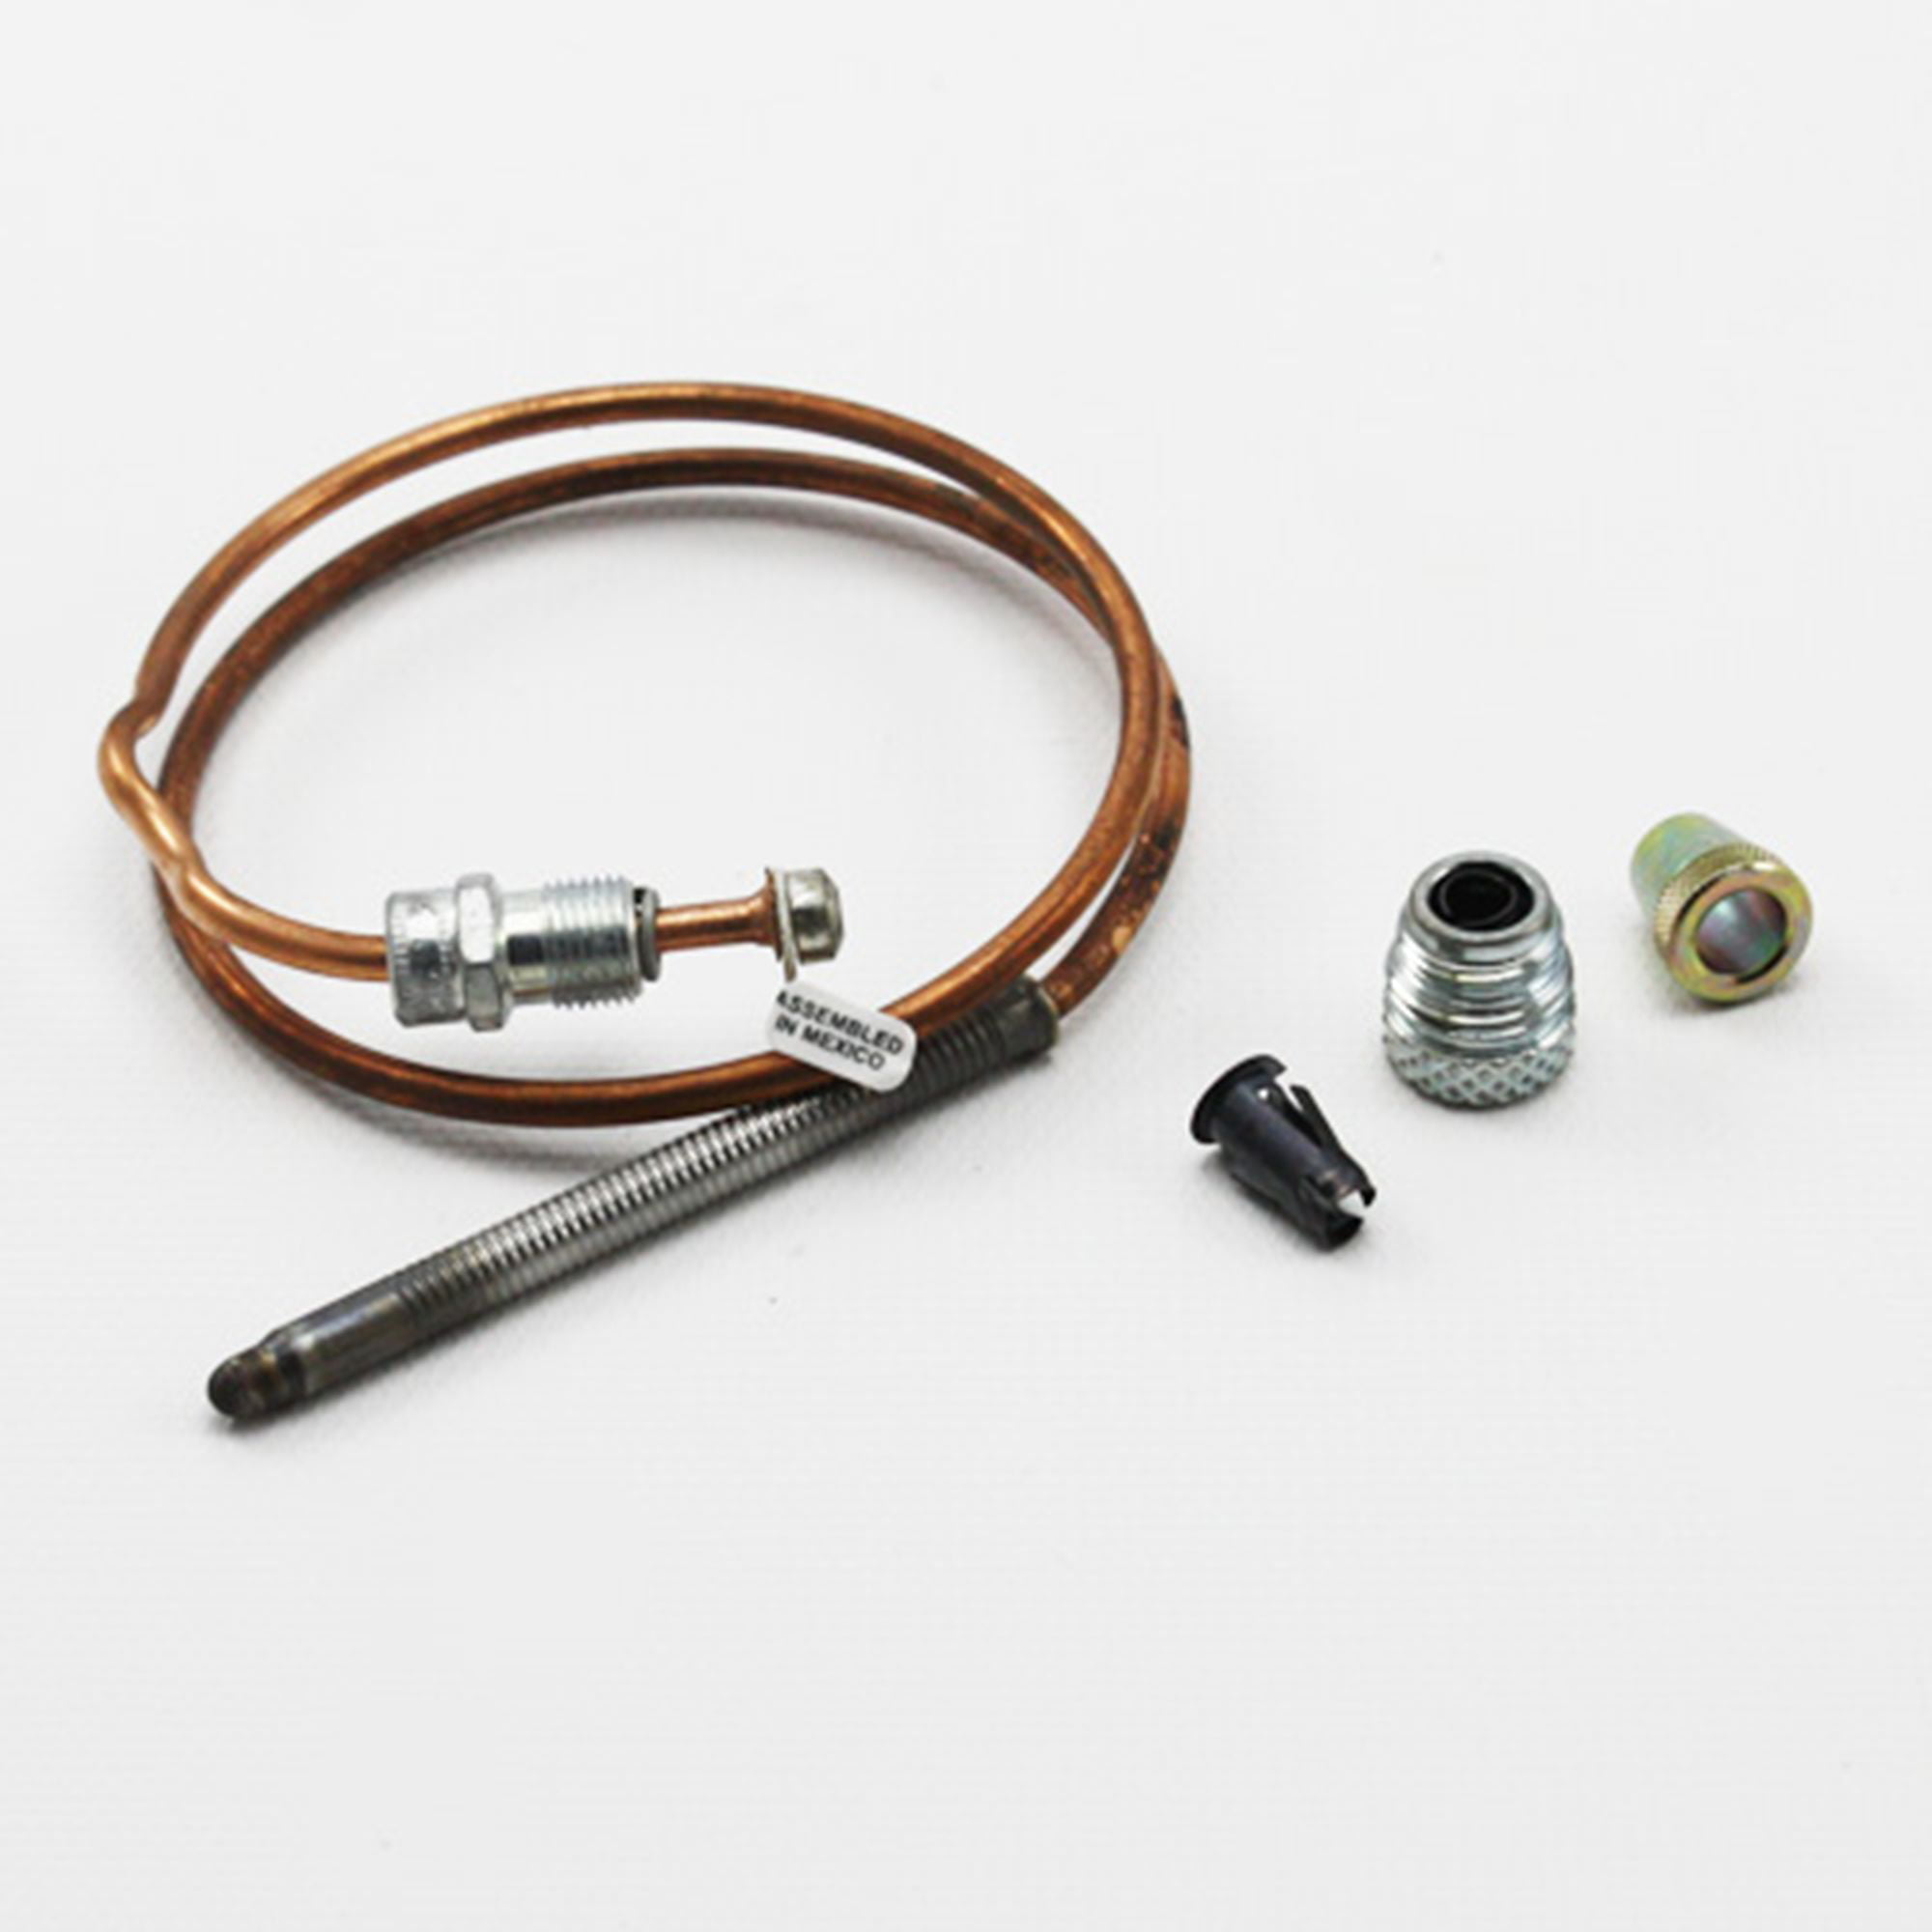 Robertshaw Pg9 Pilot Generator Replacement Kit 1820-009 Thermopile Cac594828 for sale online 